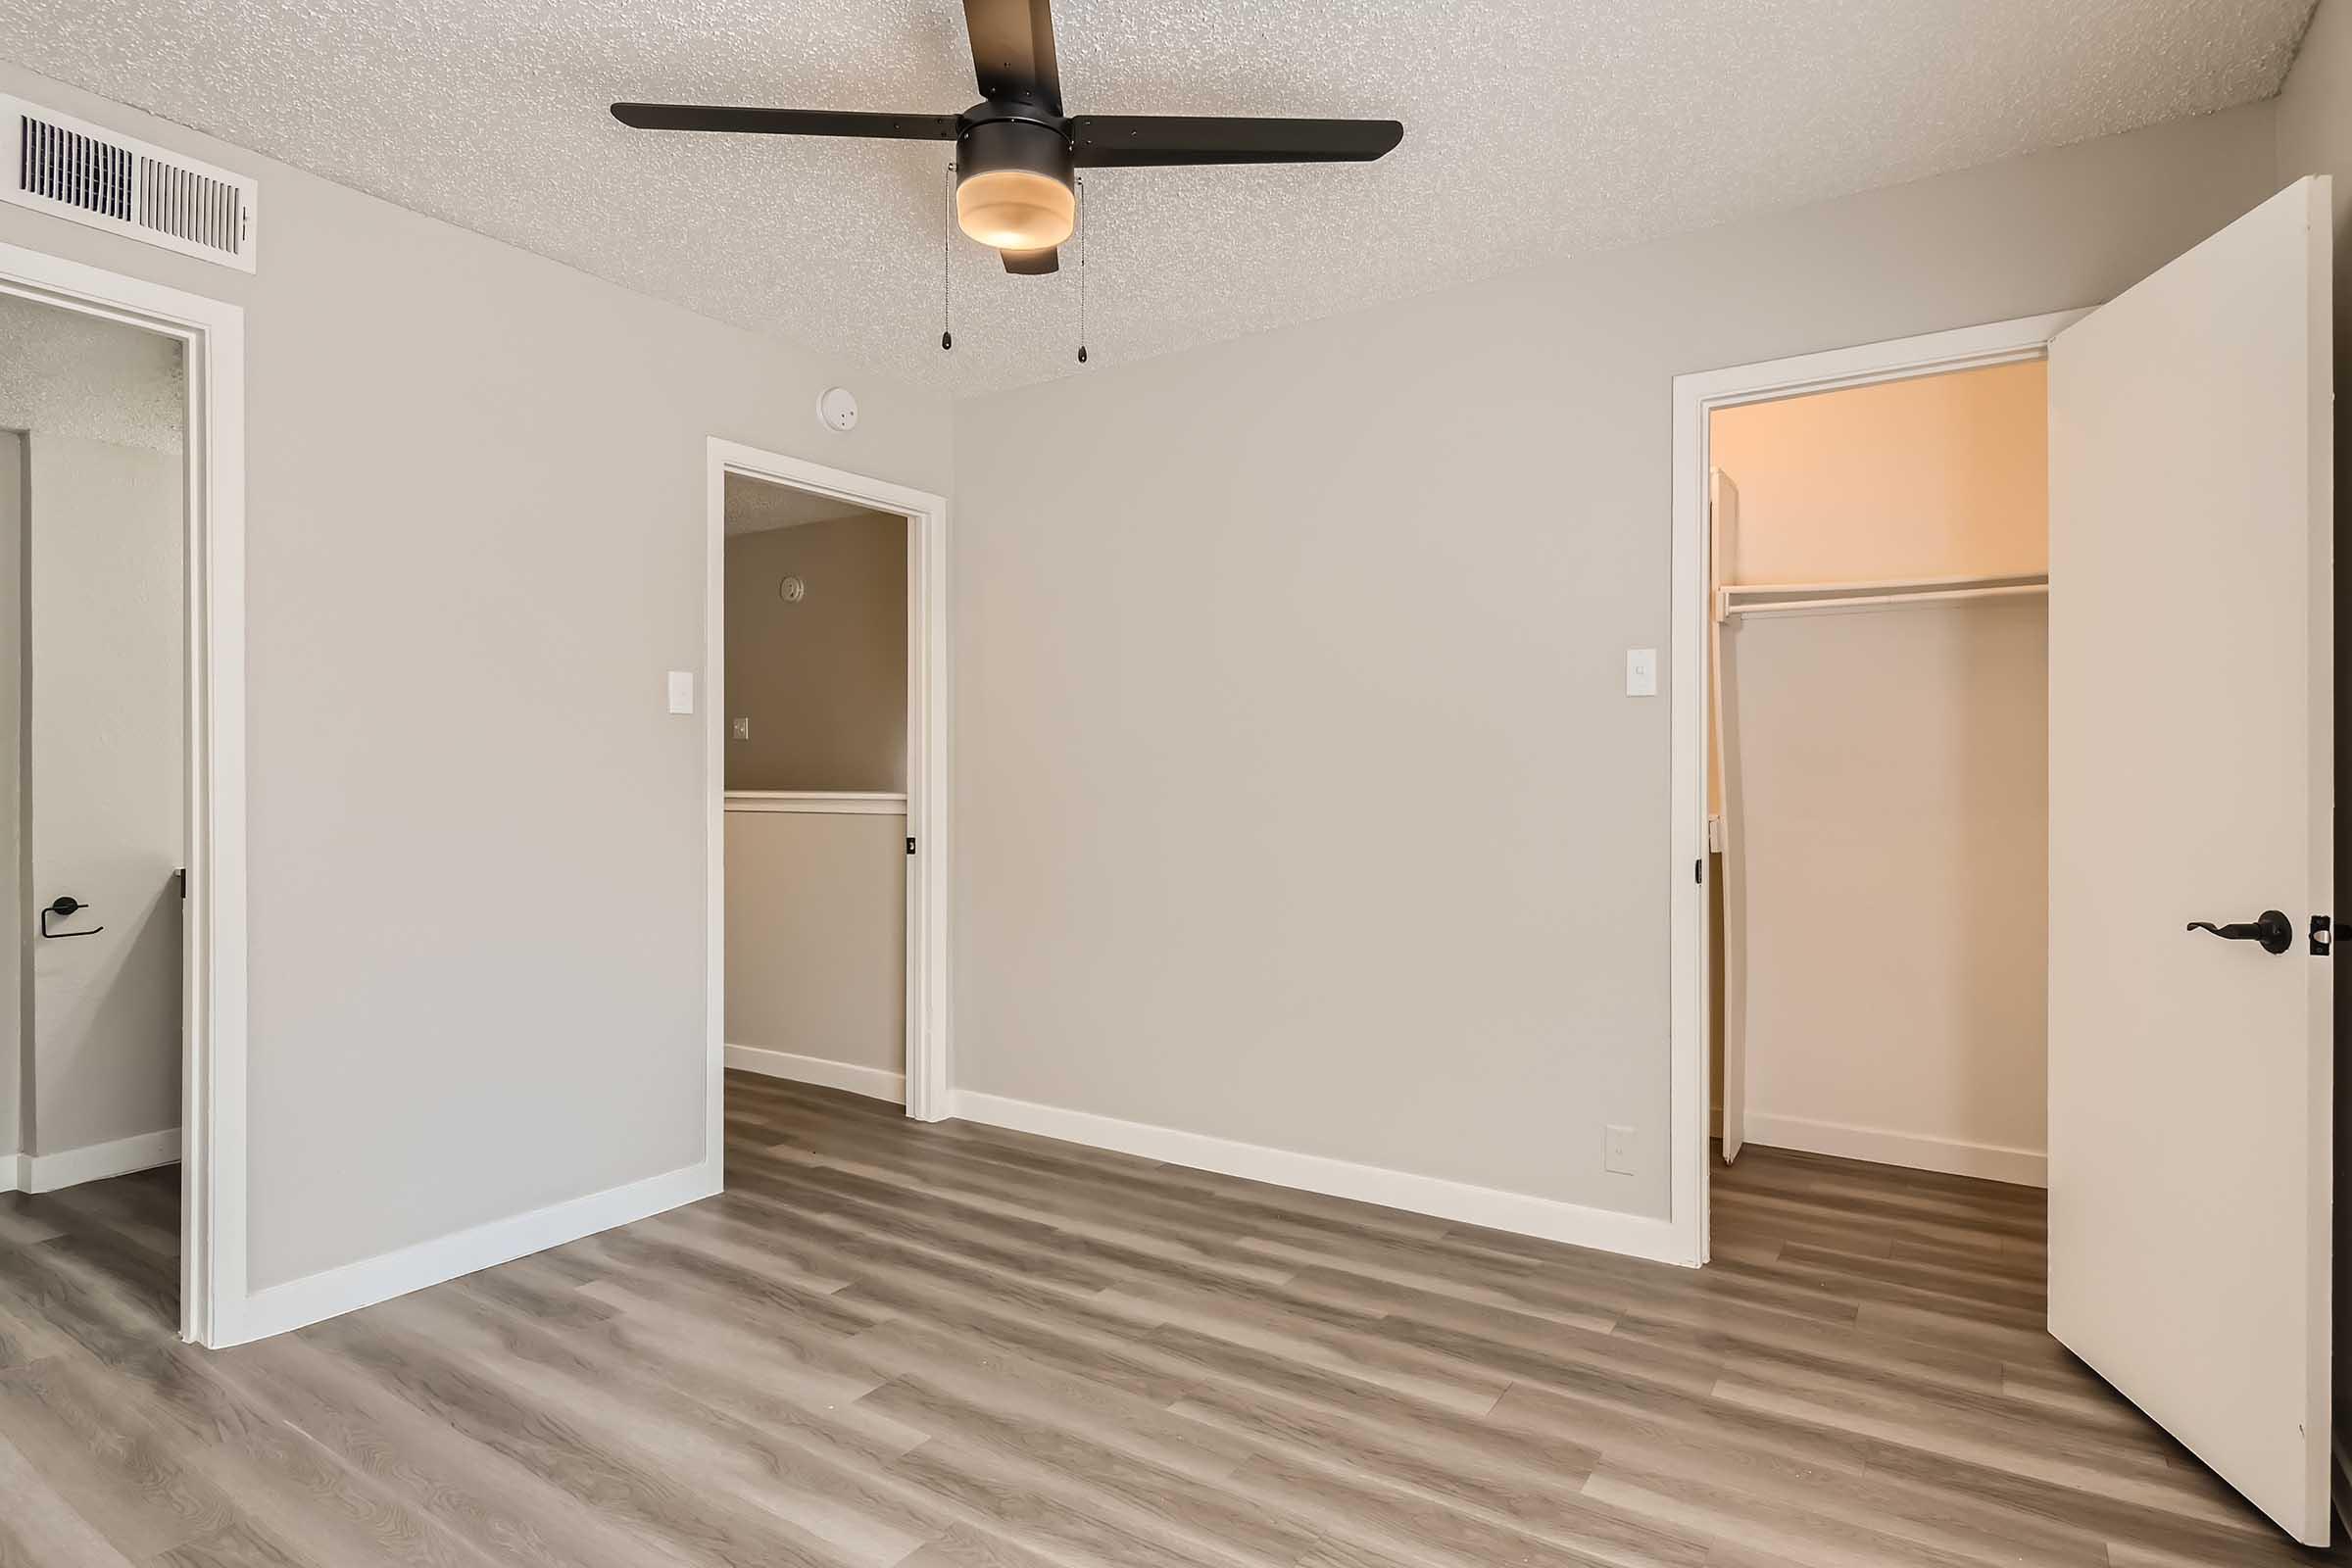 A large apartment bedroom with a closet at Rise North Arlington.